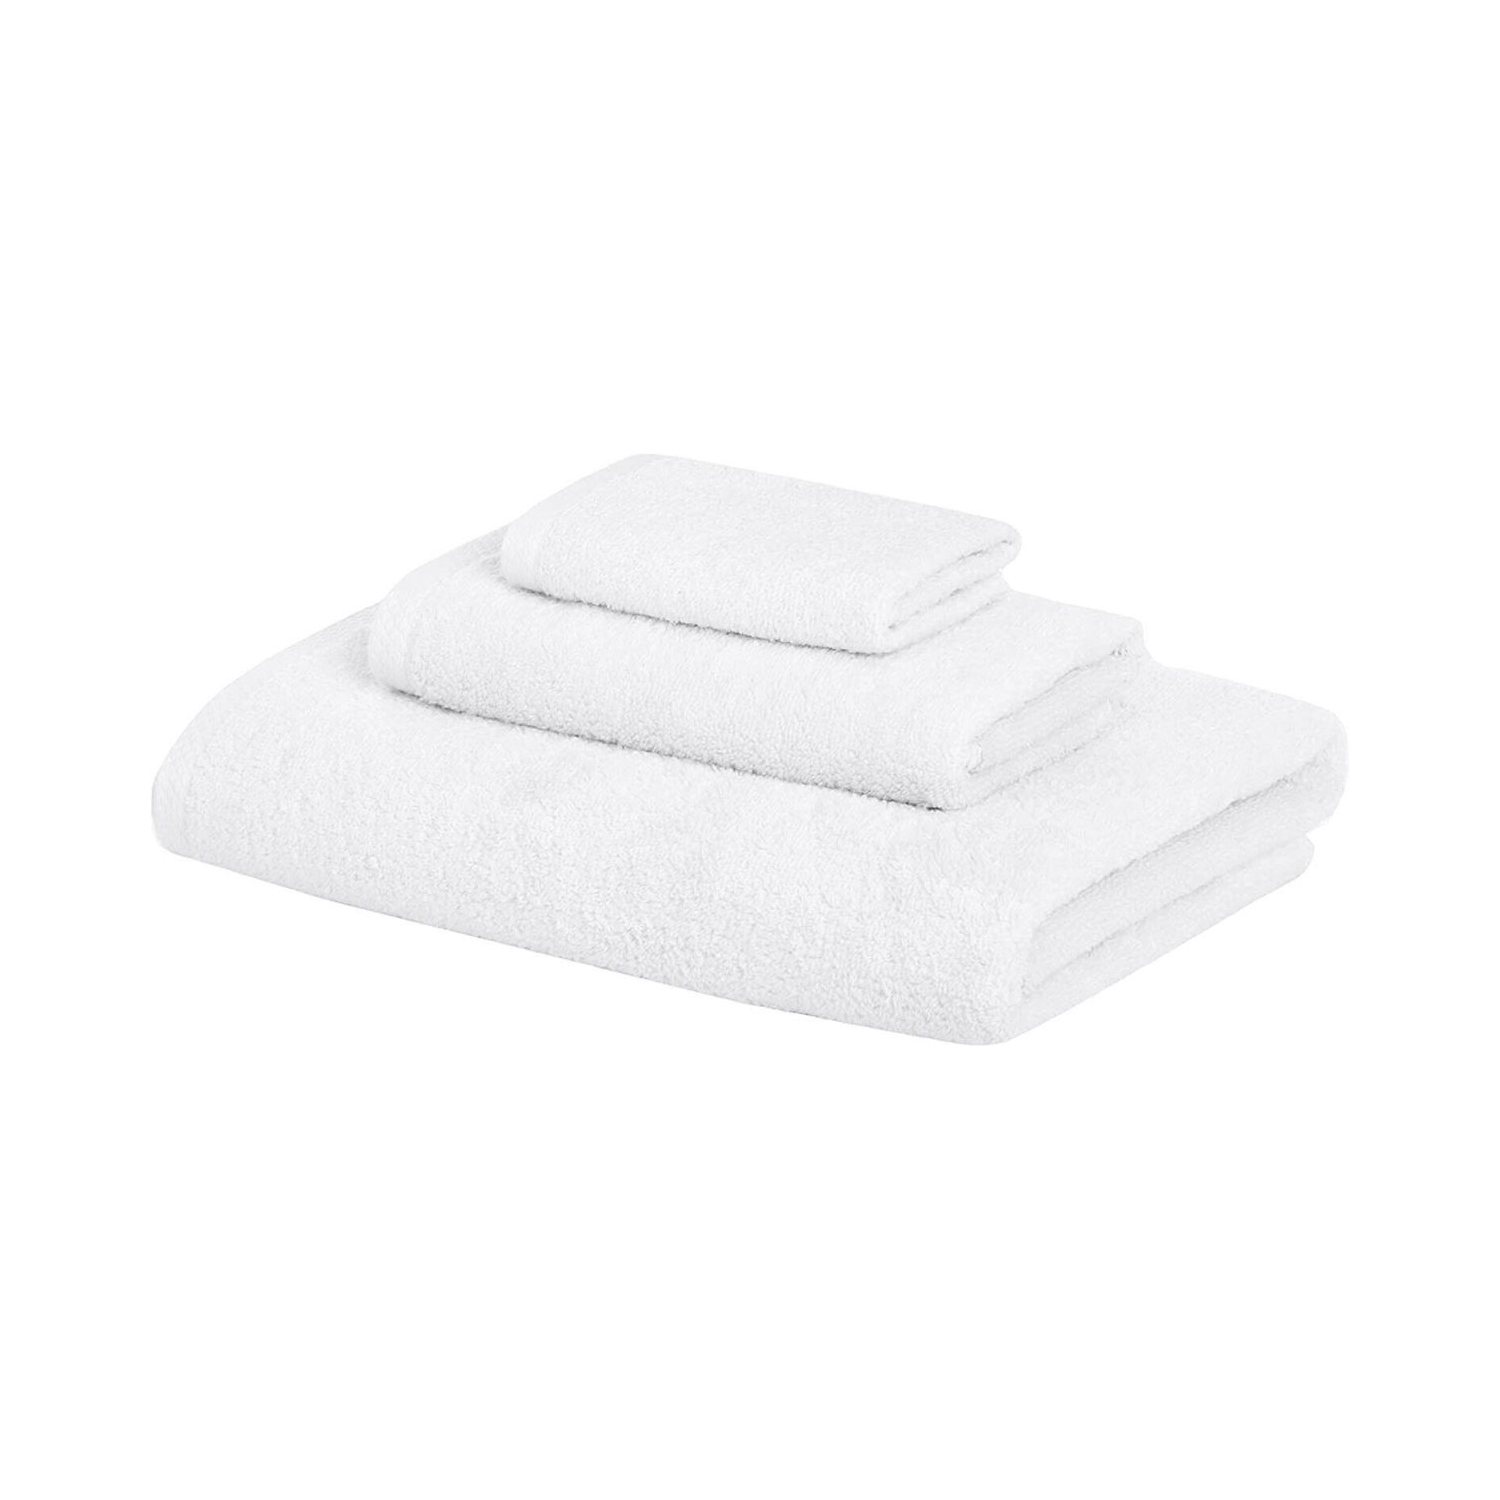 AmazonBasics 12x27 Inches Ultra-Absorbent Quick-Dry Towel Set of 3 - White